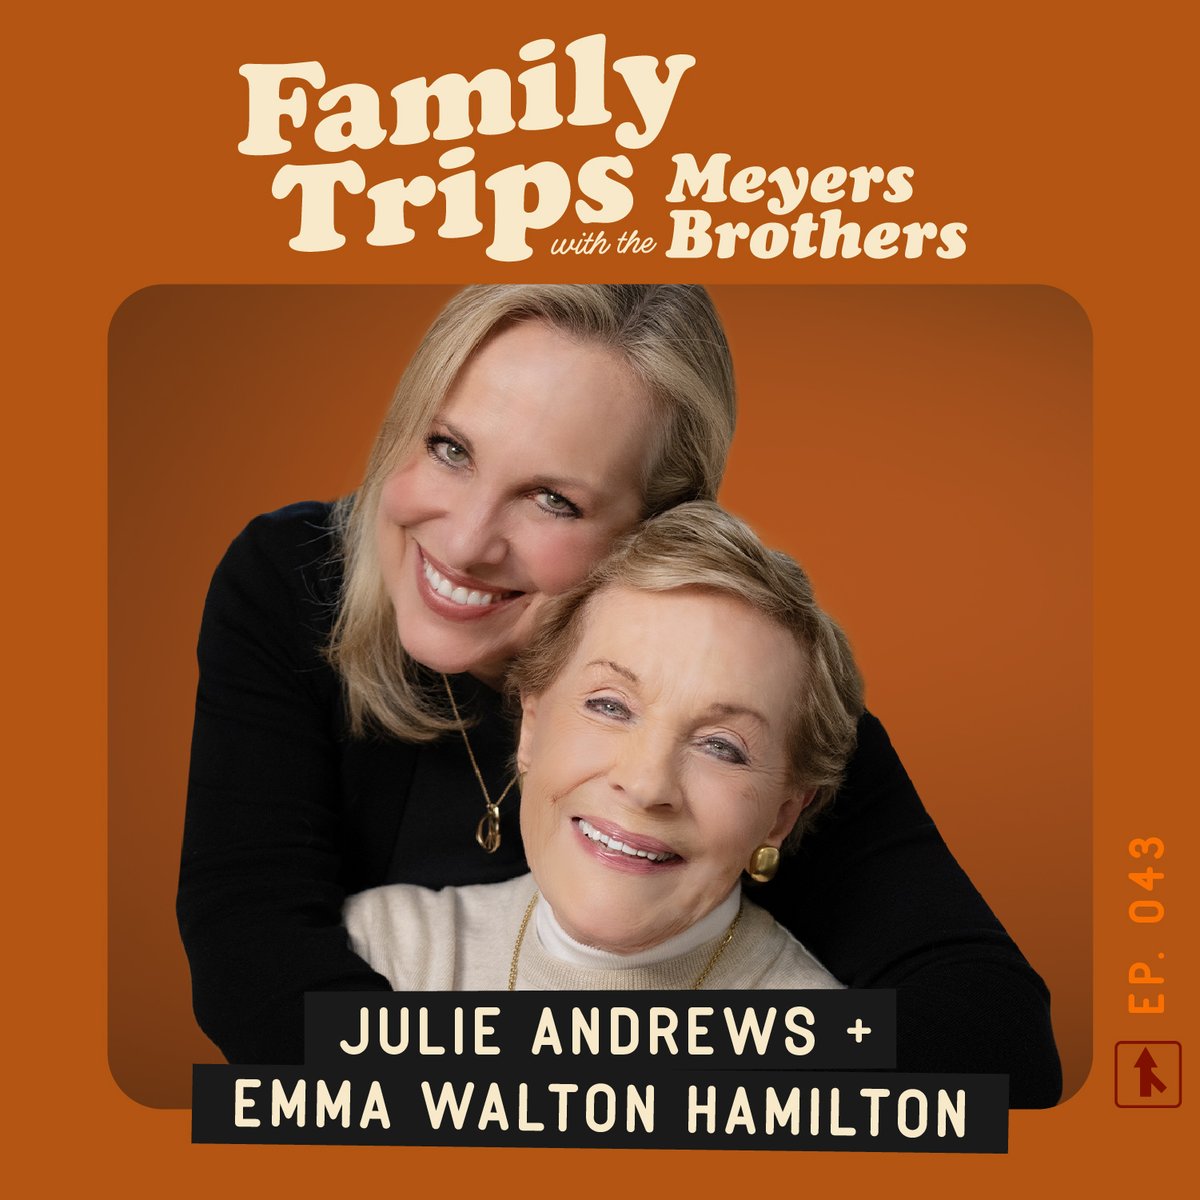 Julie & Emma had a great time talking to Seth & Josh Meyers for their Family Trips w/ the Meyers Bros podcast! - Team Julie …th-the-meyers-brothers.simplecast.com/episodes/julie…